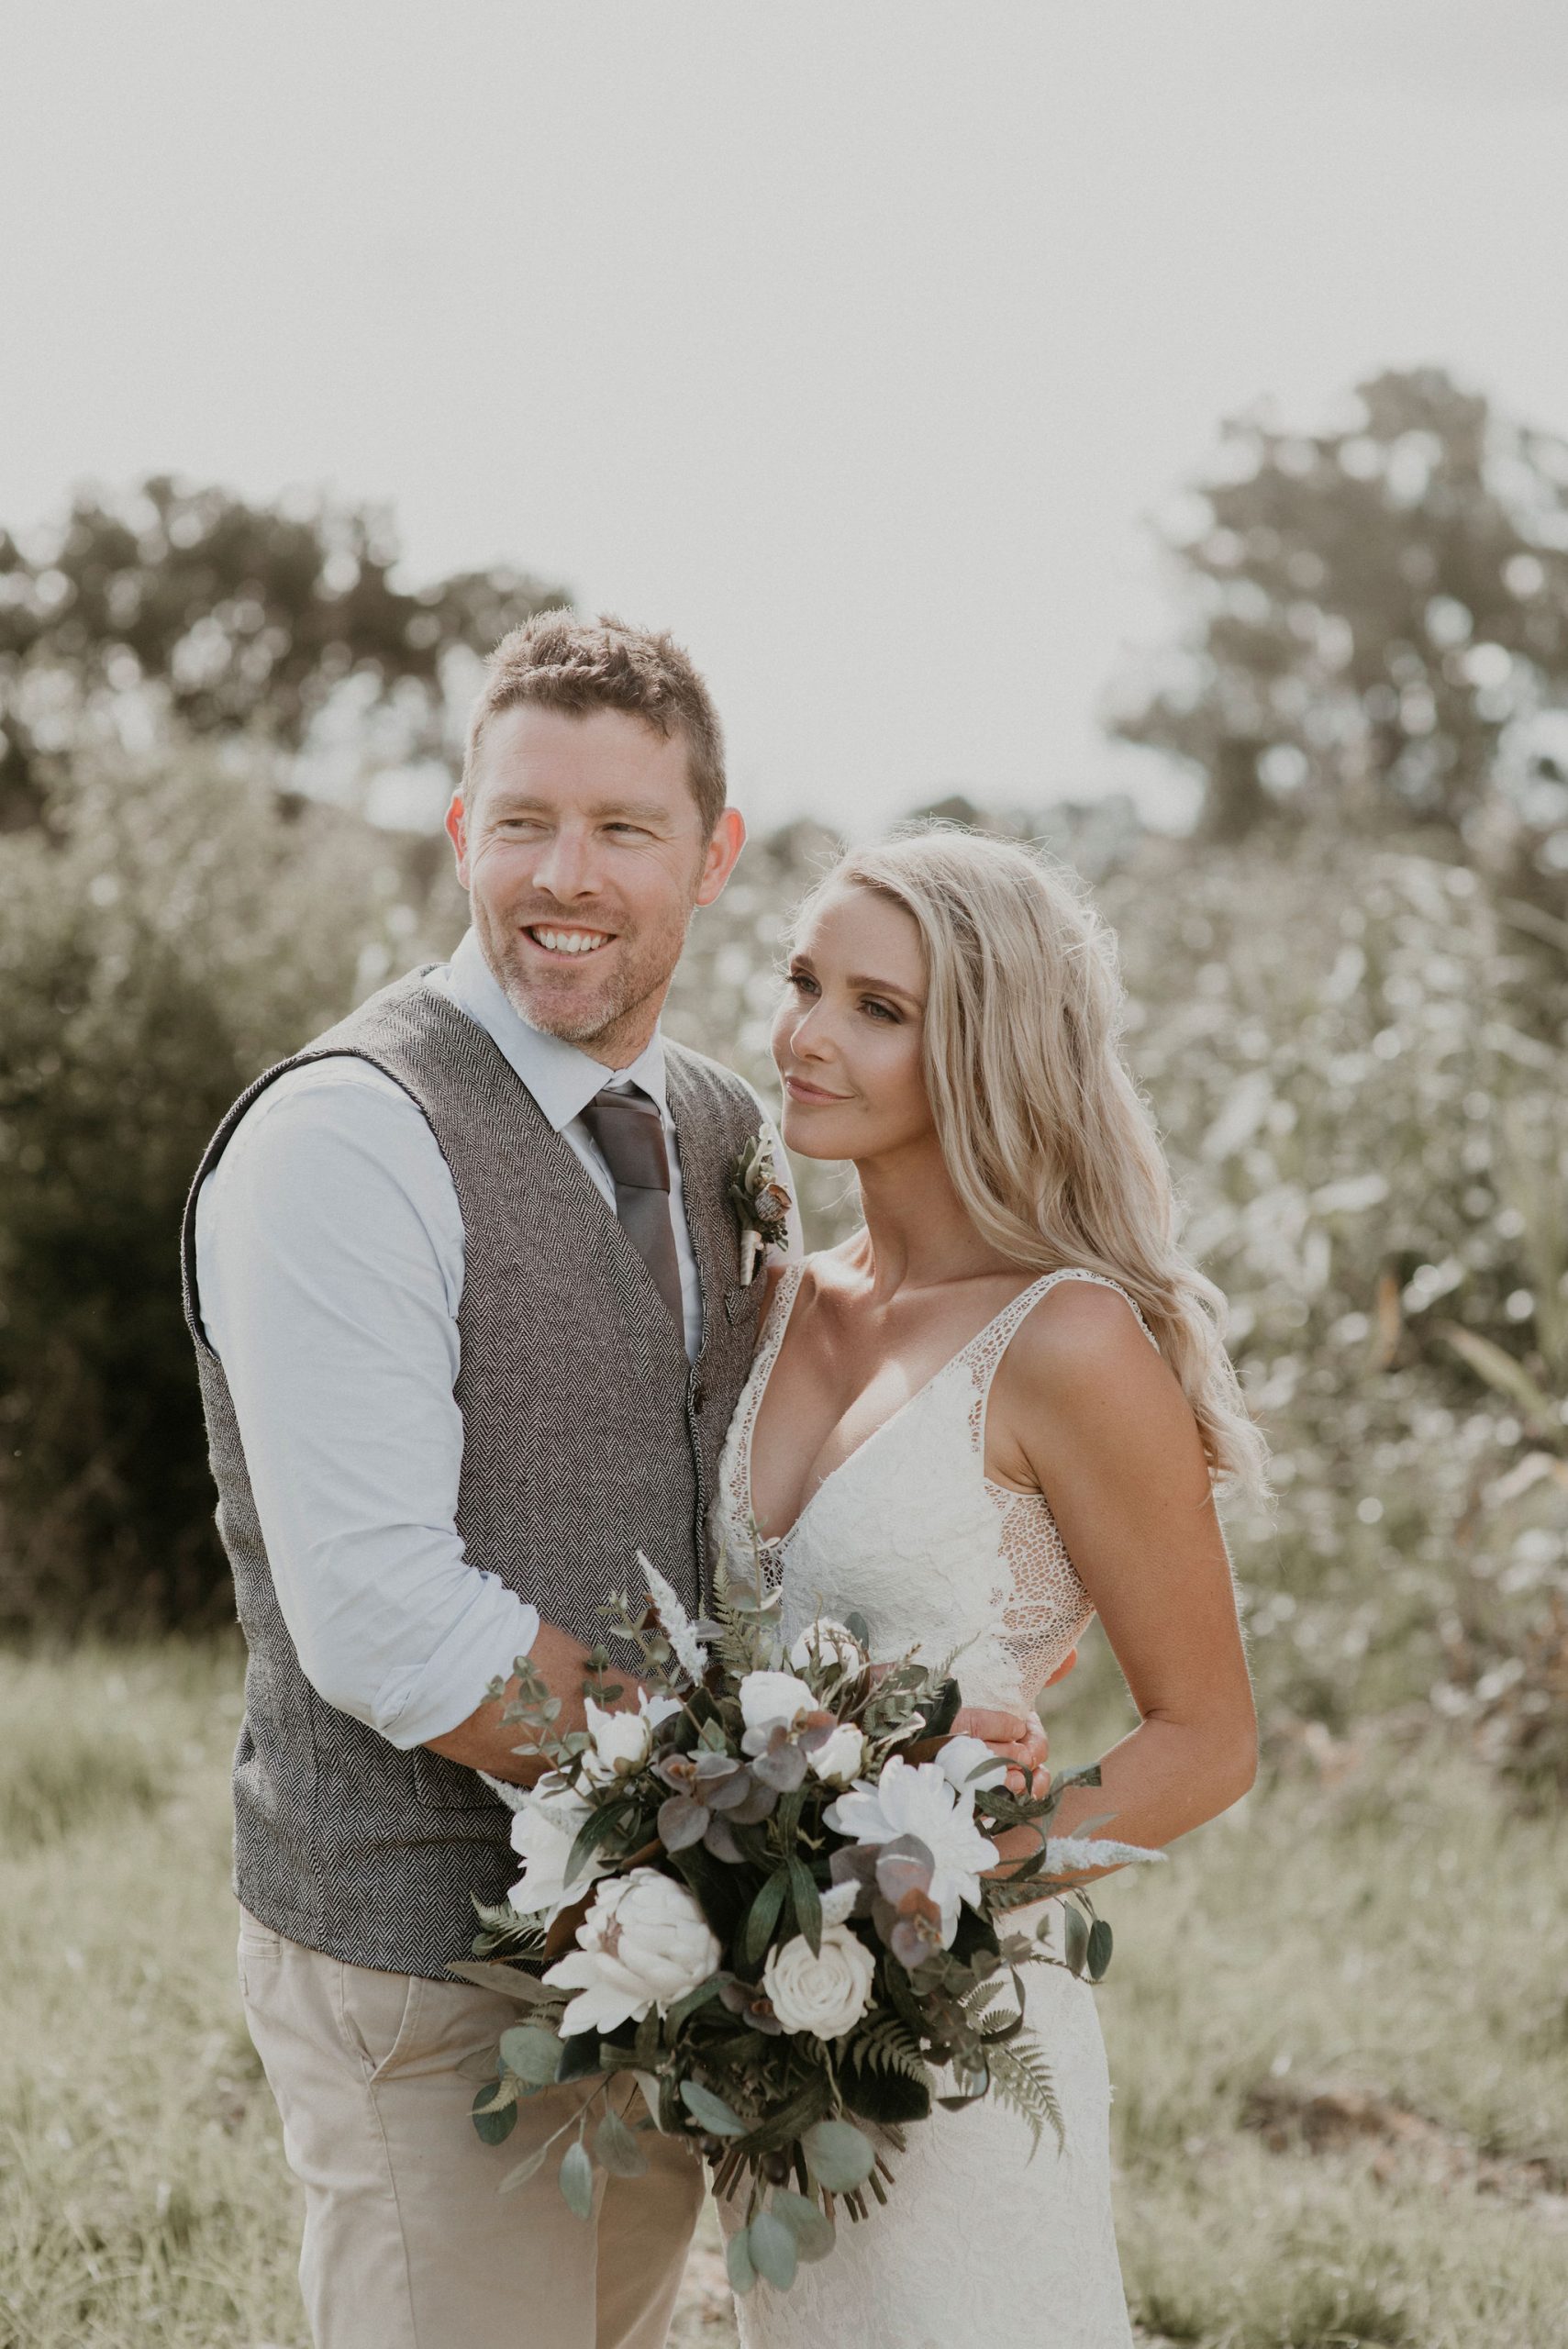 Lets-Elope-Melbourne-Celebrant-Photographer-Elopement-Package-Victoria-Sarah-Matler-Photography-Elop-at-Home-Farm-weddings-intimate-11